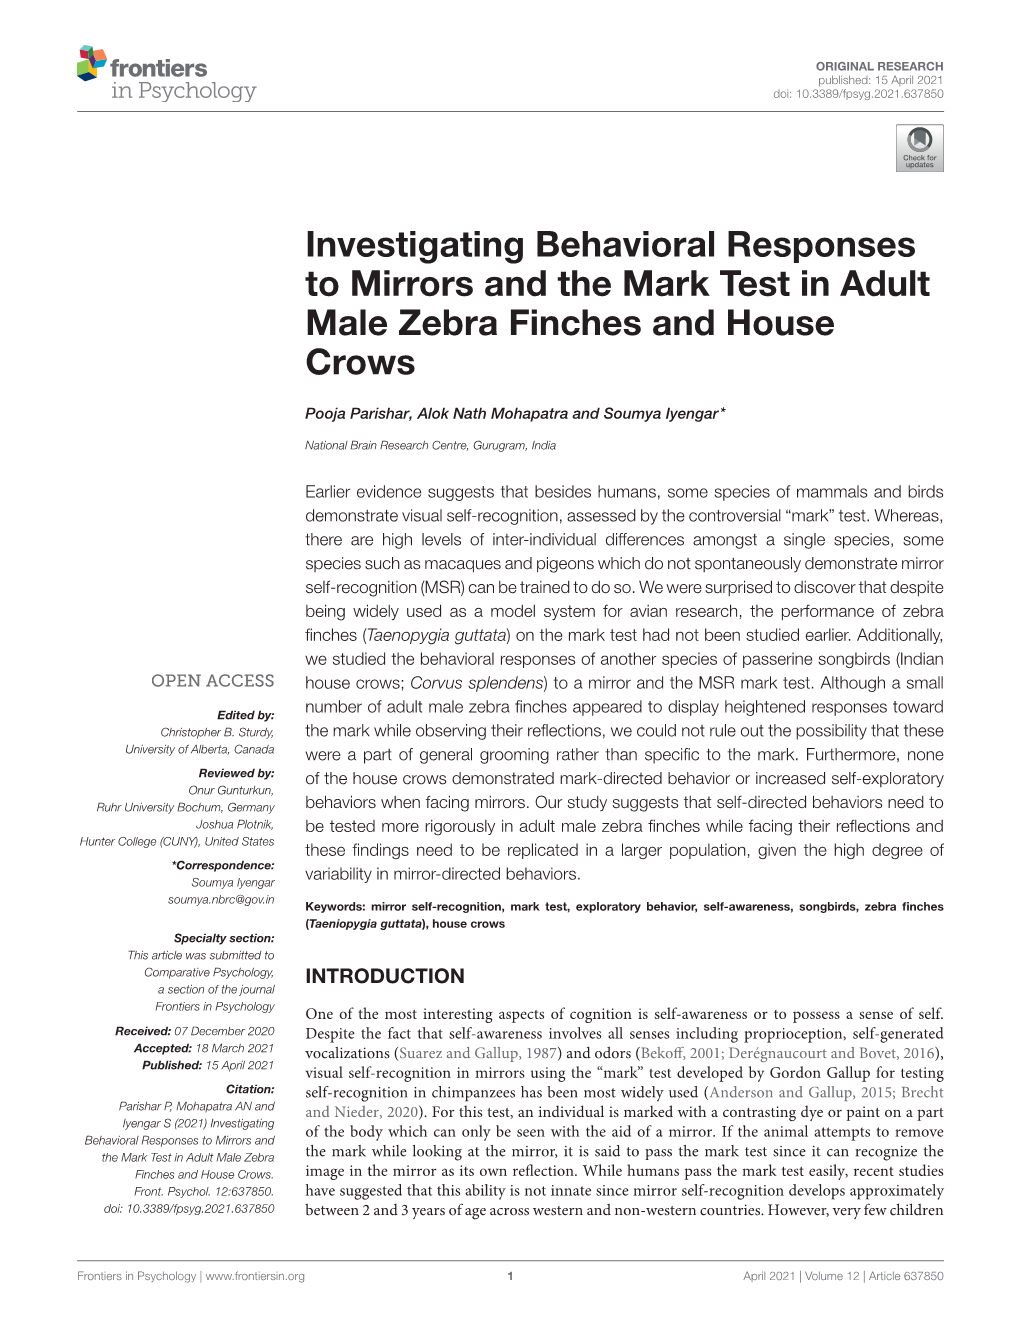 Investigating Behavioral Responses to Mirrors and the Mark Test in Adult Male Zebra Finches and House Crows